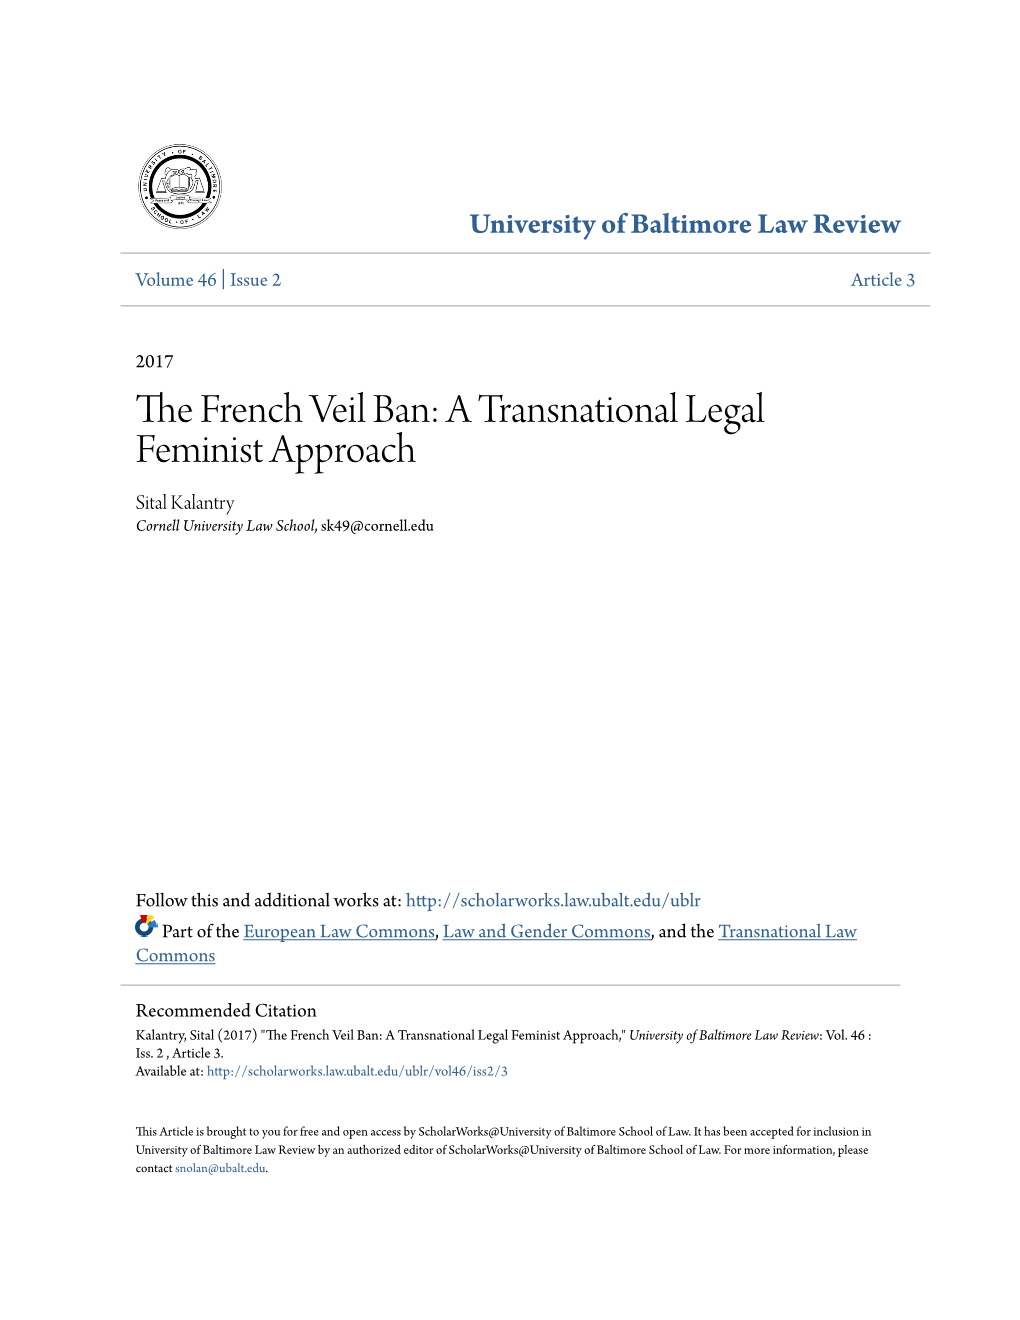 The French Veil Ban: a Transnational Legal Feminist Approach